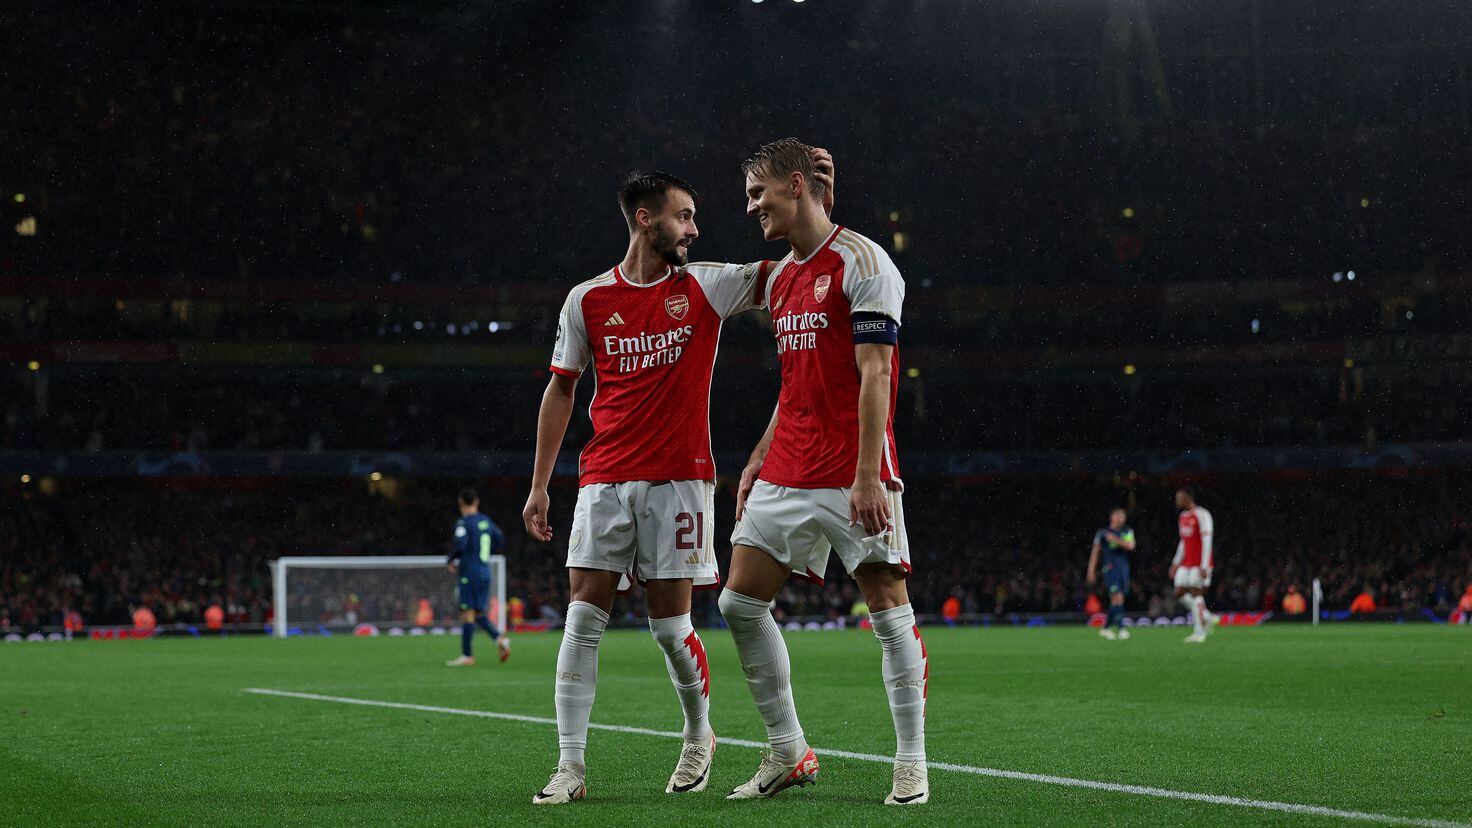 UEFA Champions League: Five keys to Arsenal’s win against PSV